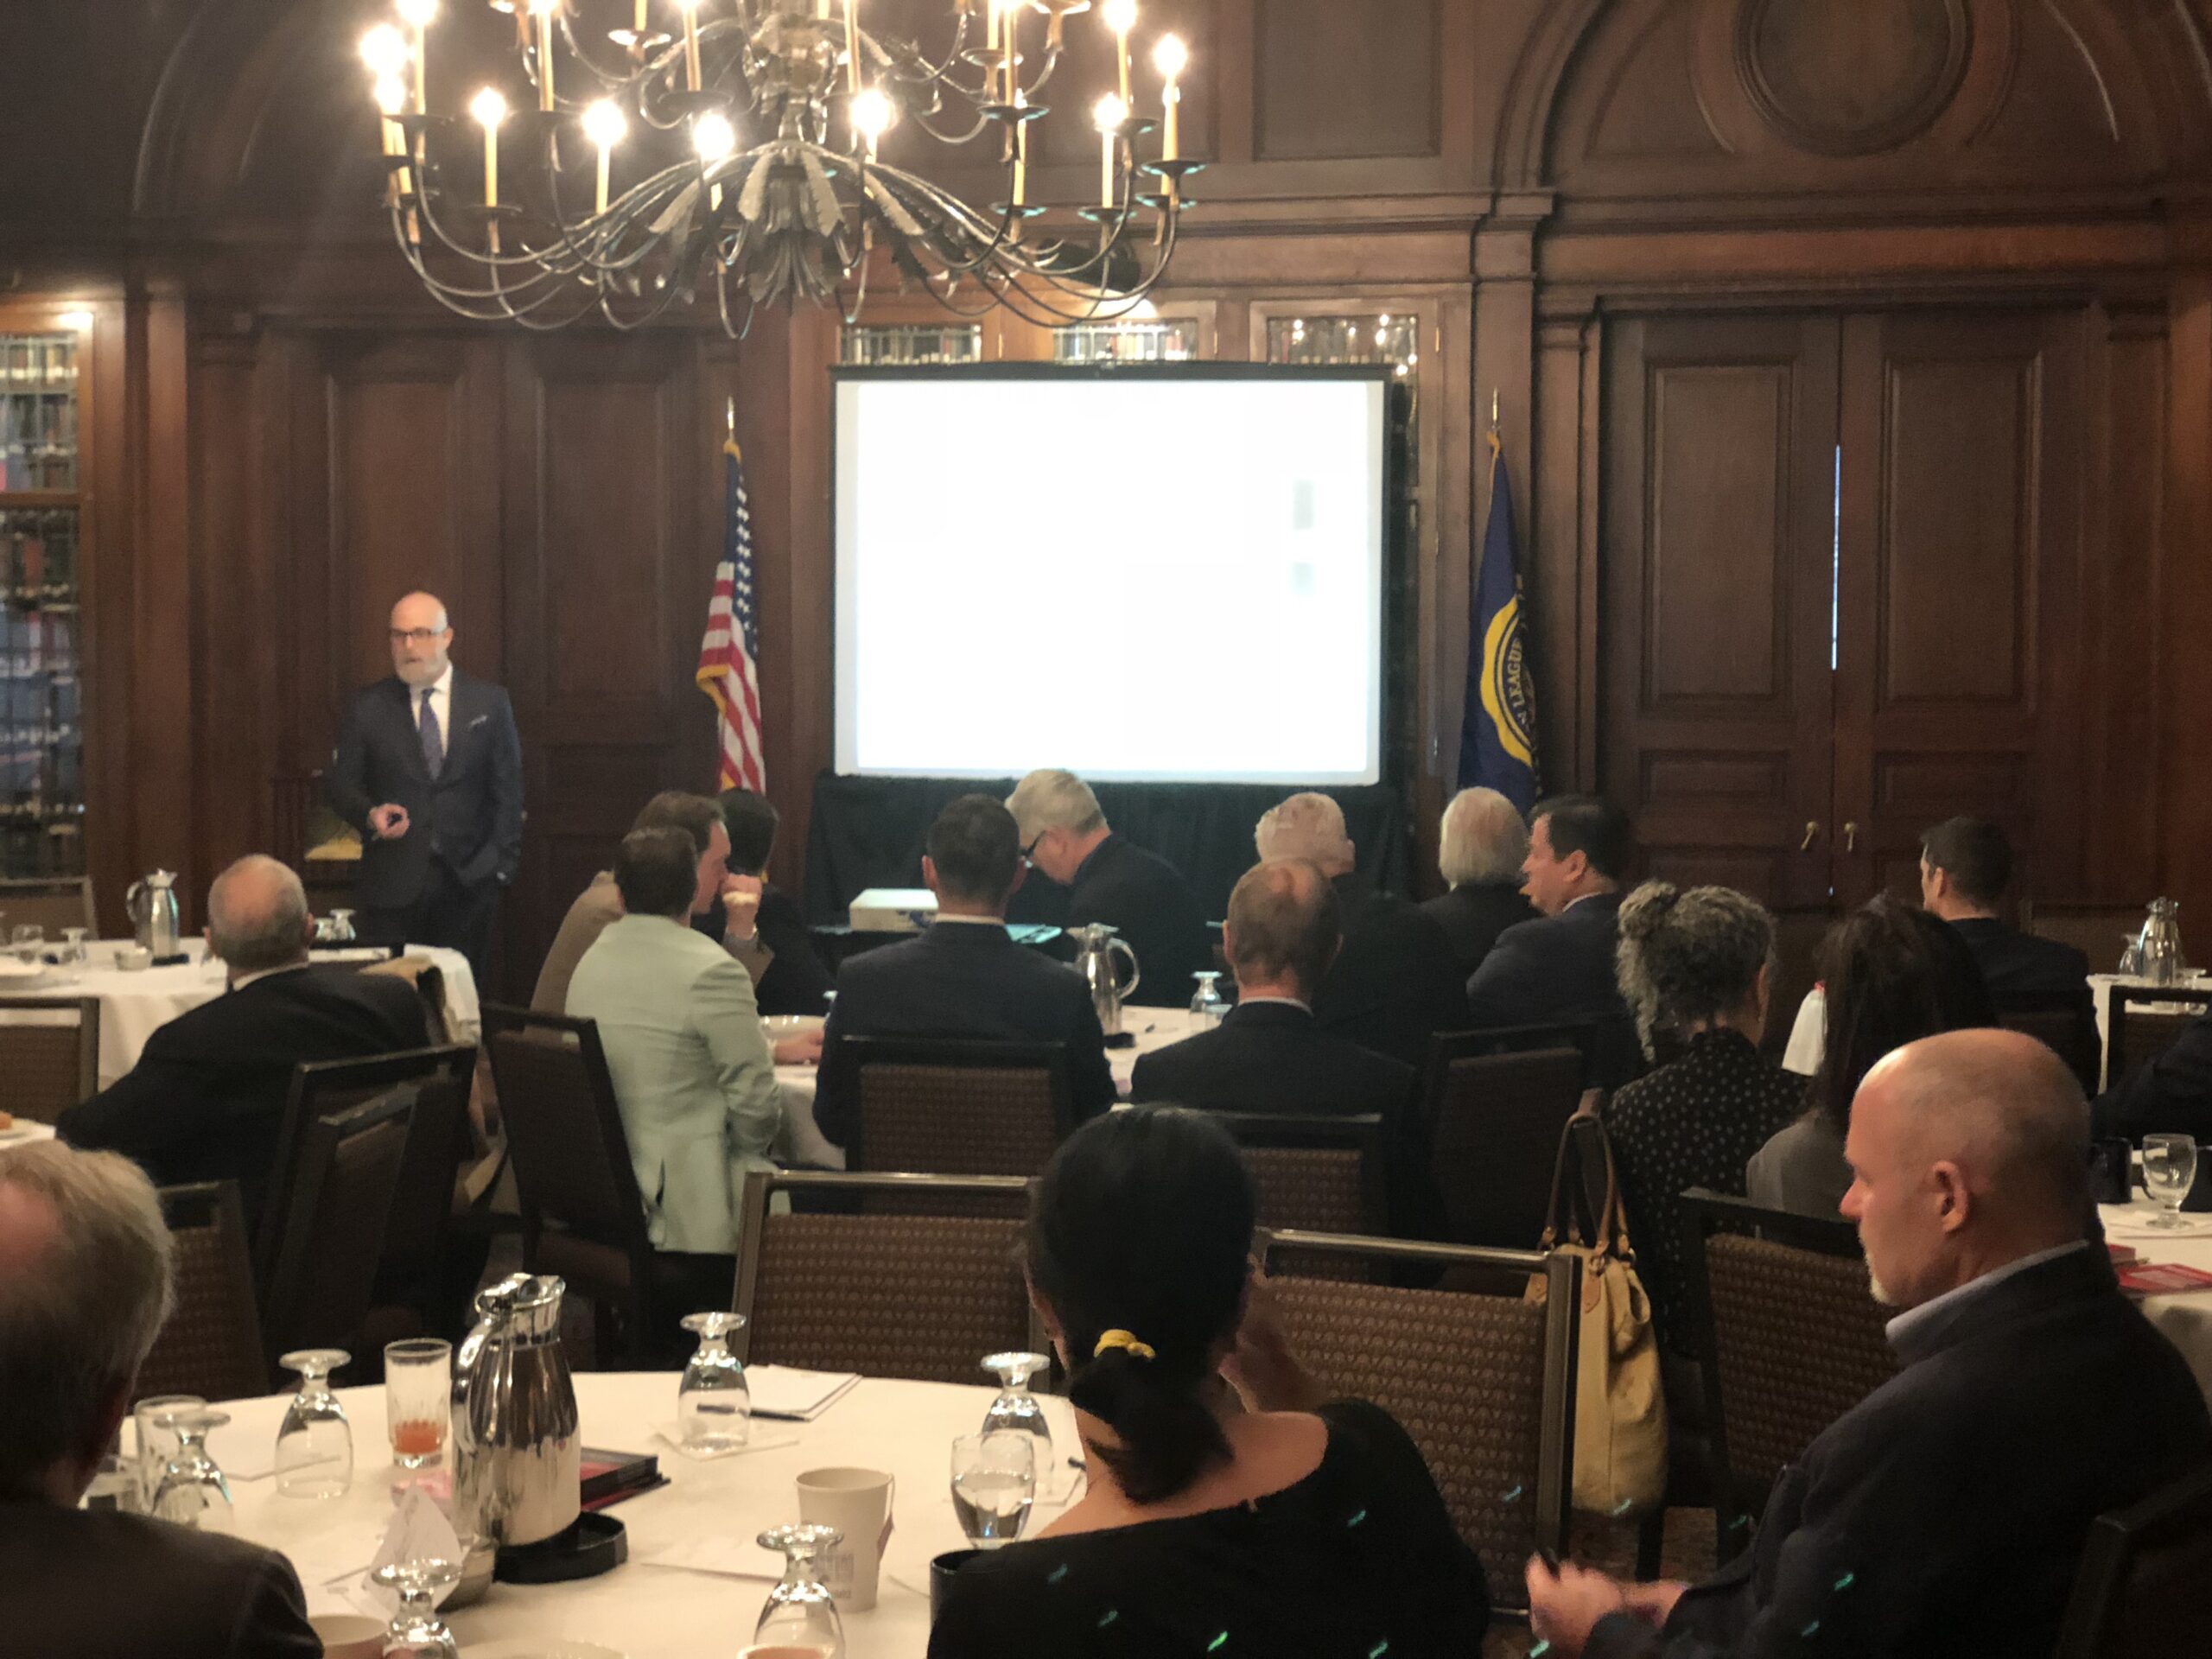 Michael Lefkowitz Conducts Exit Planning Seminar at Union League in Philadelphia, PA